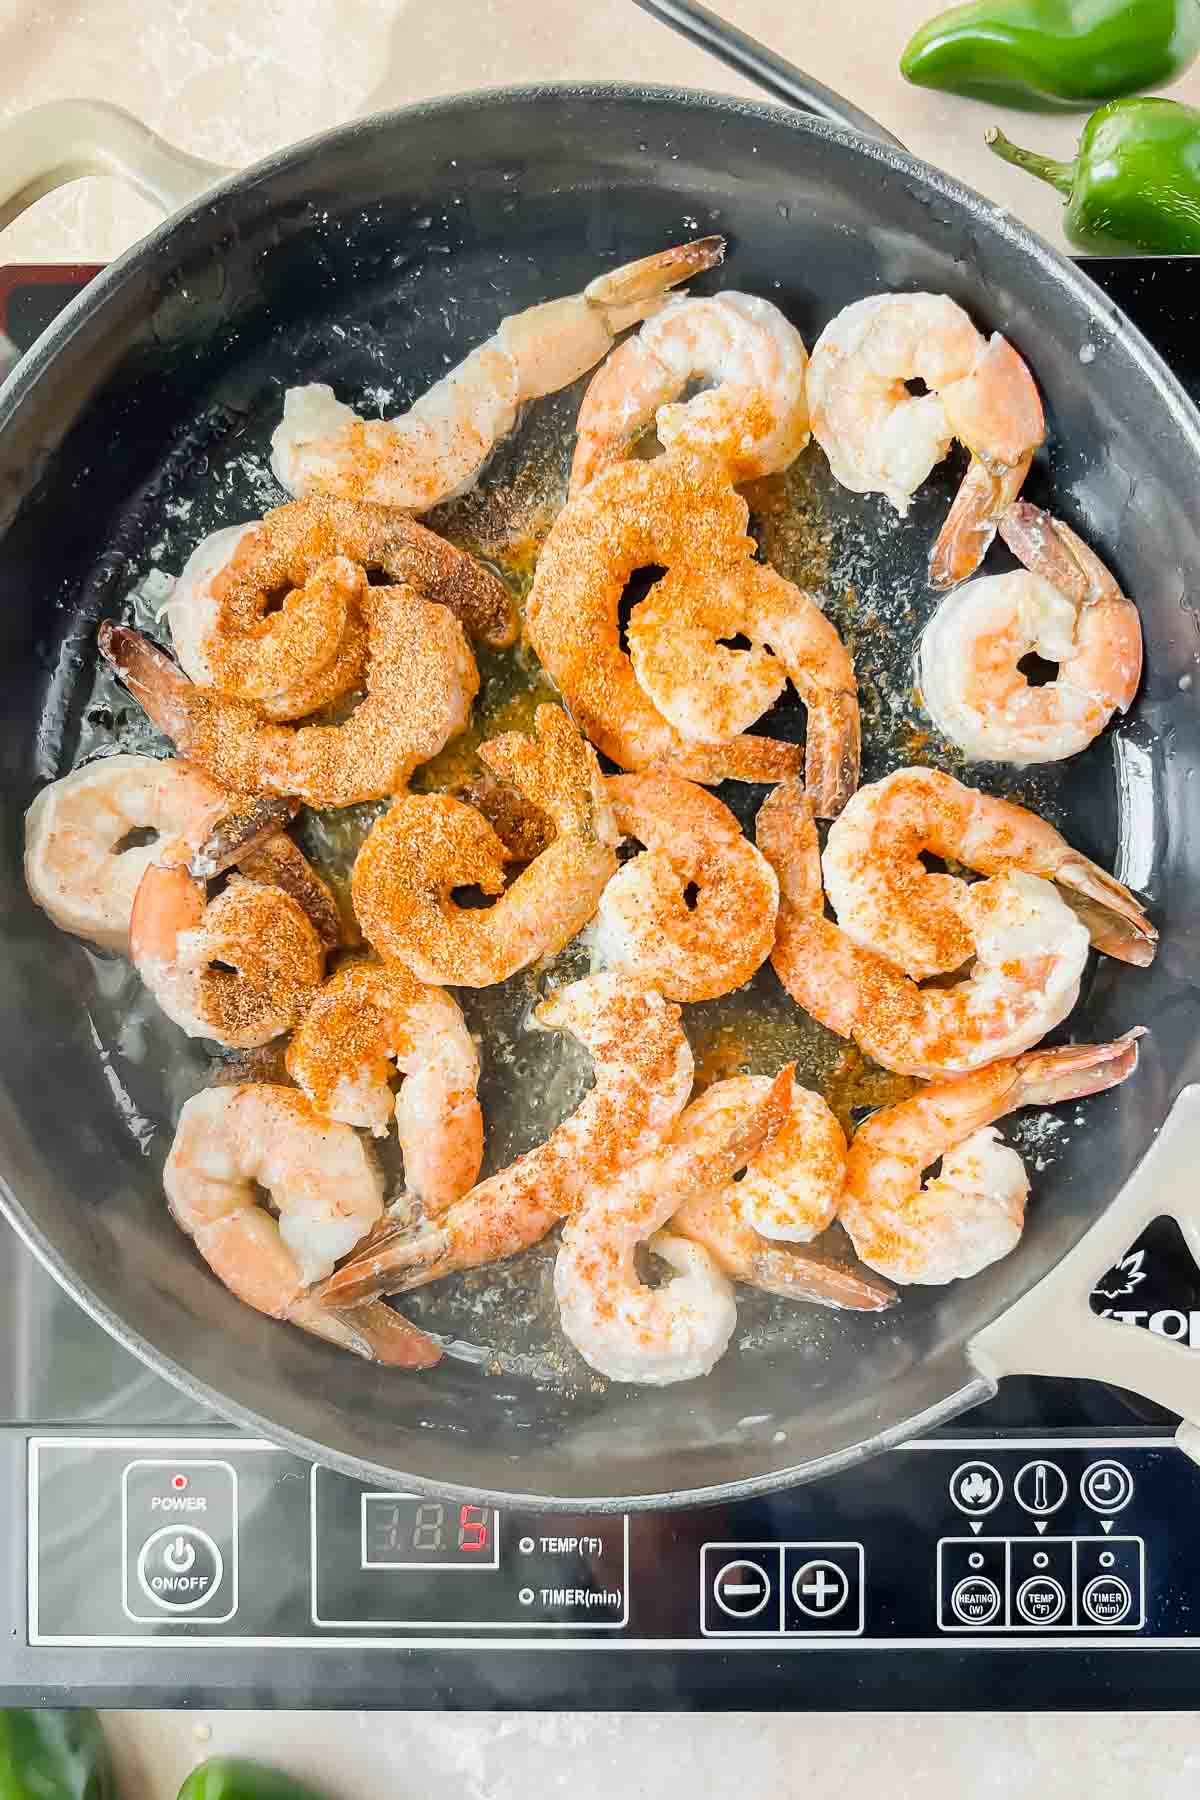 Shrimp with tails on cooking in skillet sprinkled with seasonings.